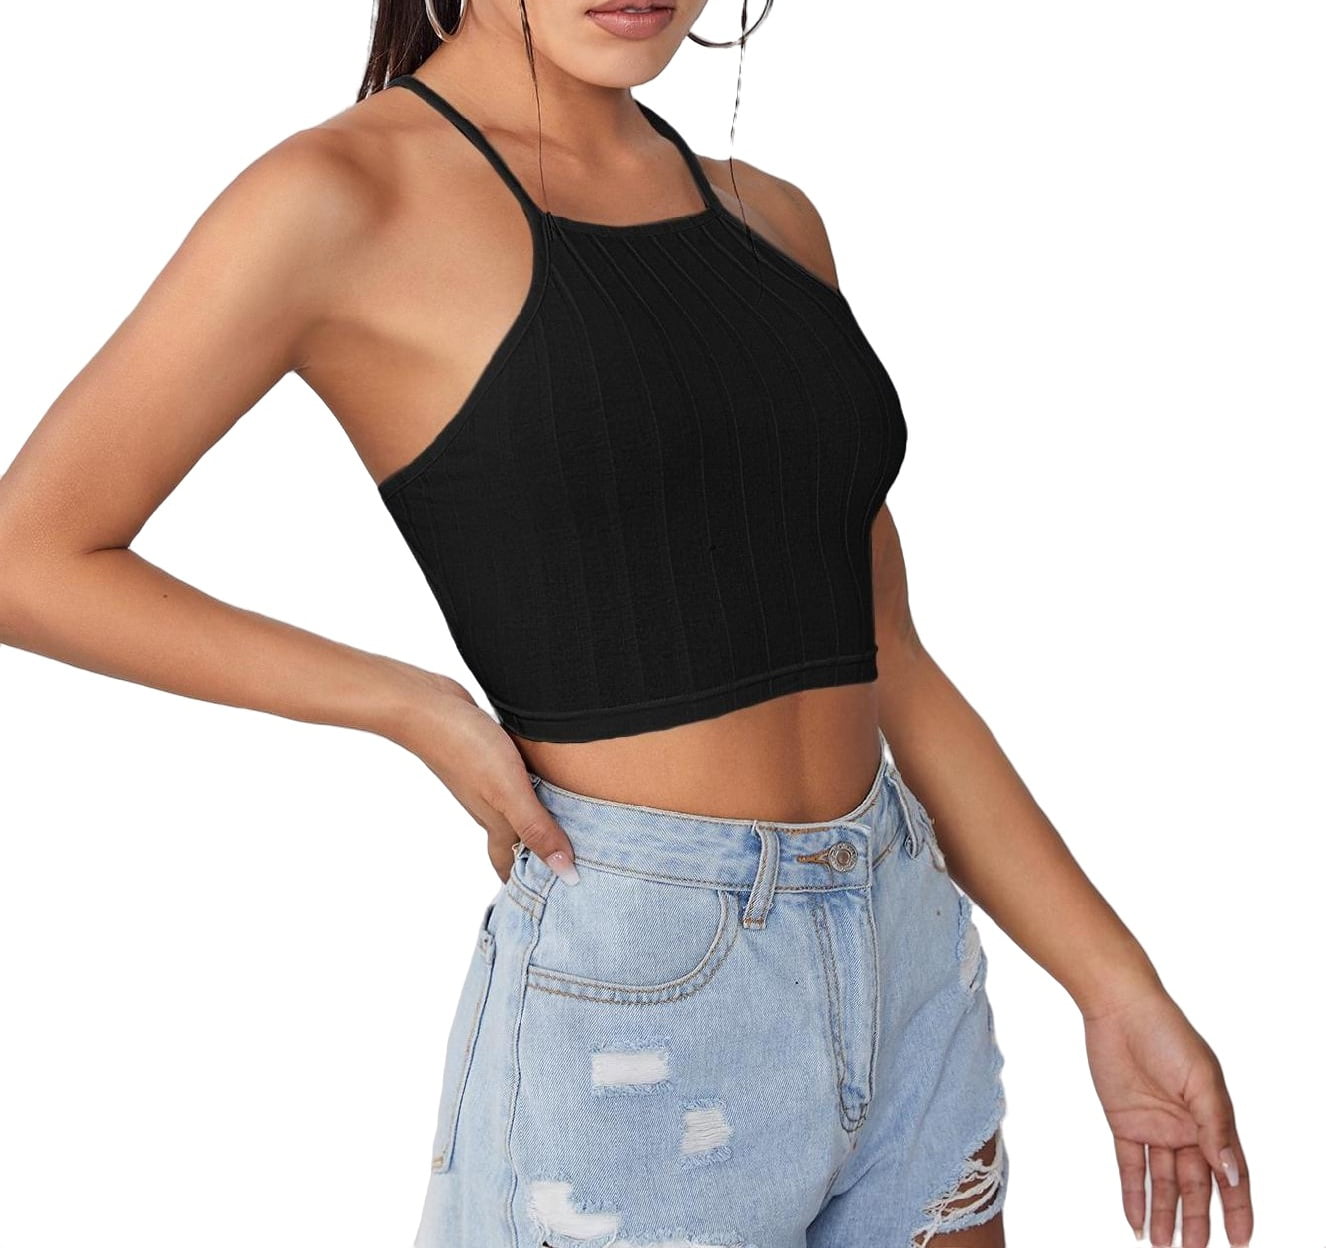  Women Summer Sexy Slim Top Cut Out Halter Spaghetti Strap Off  Shoulder Vest Tank Top Banded Workout Tops for Women (Black, XL) :  Clothing, Shoes & Jewelry